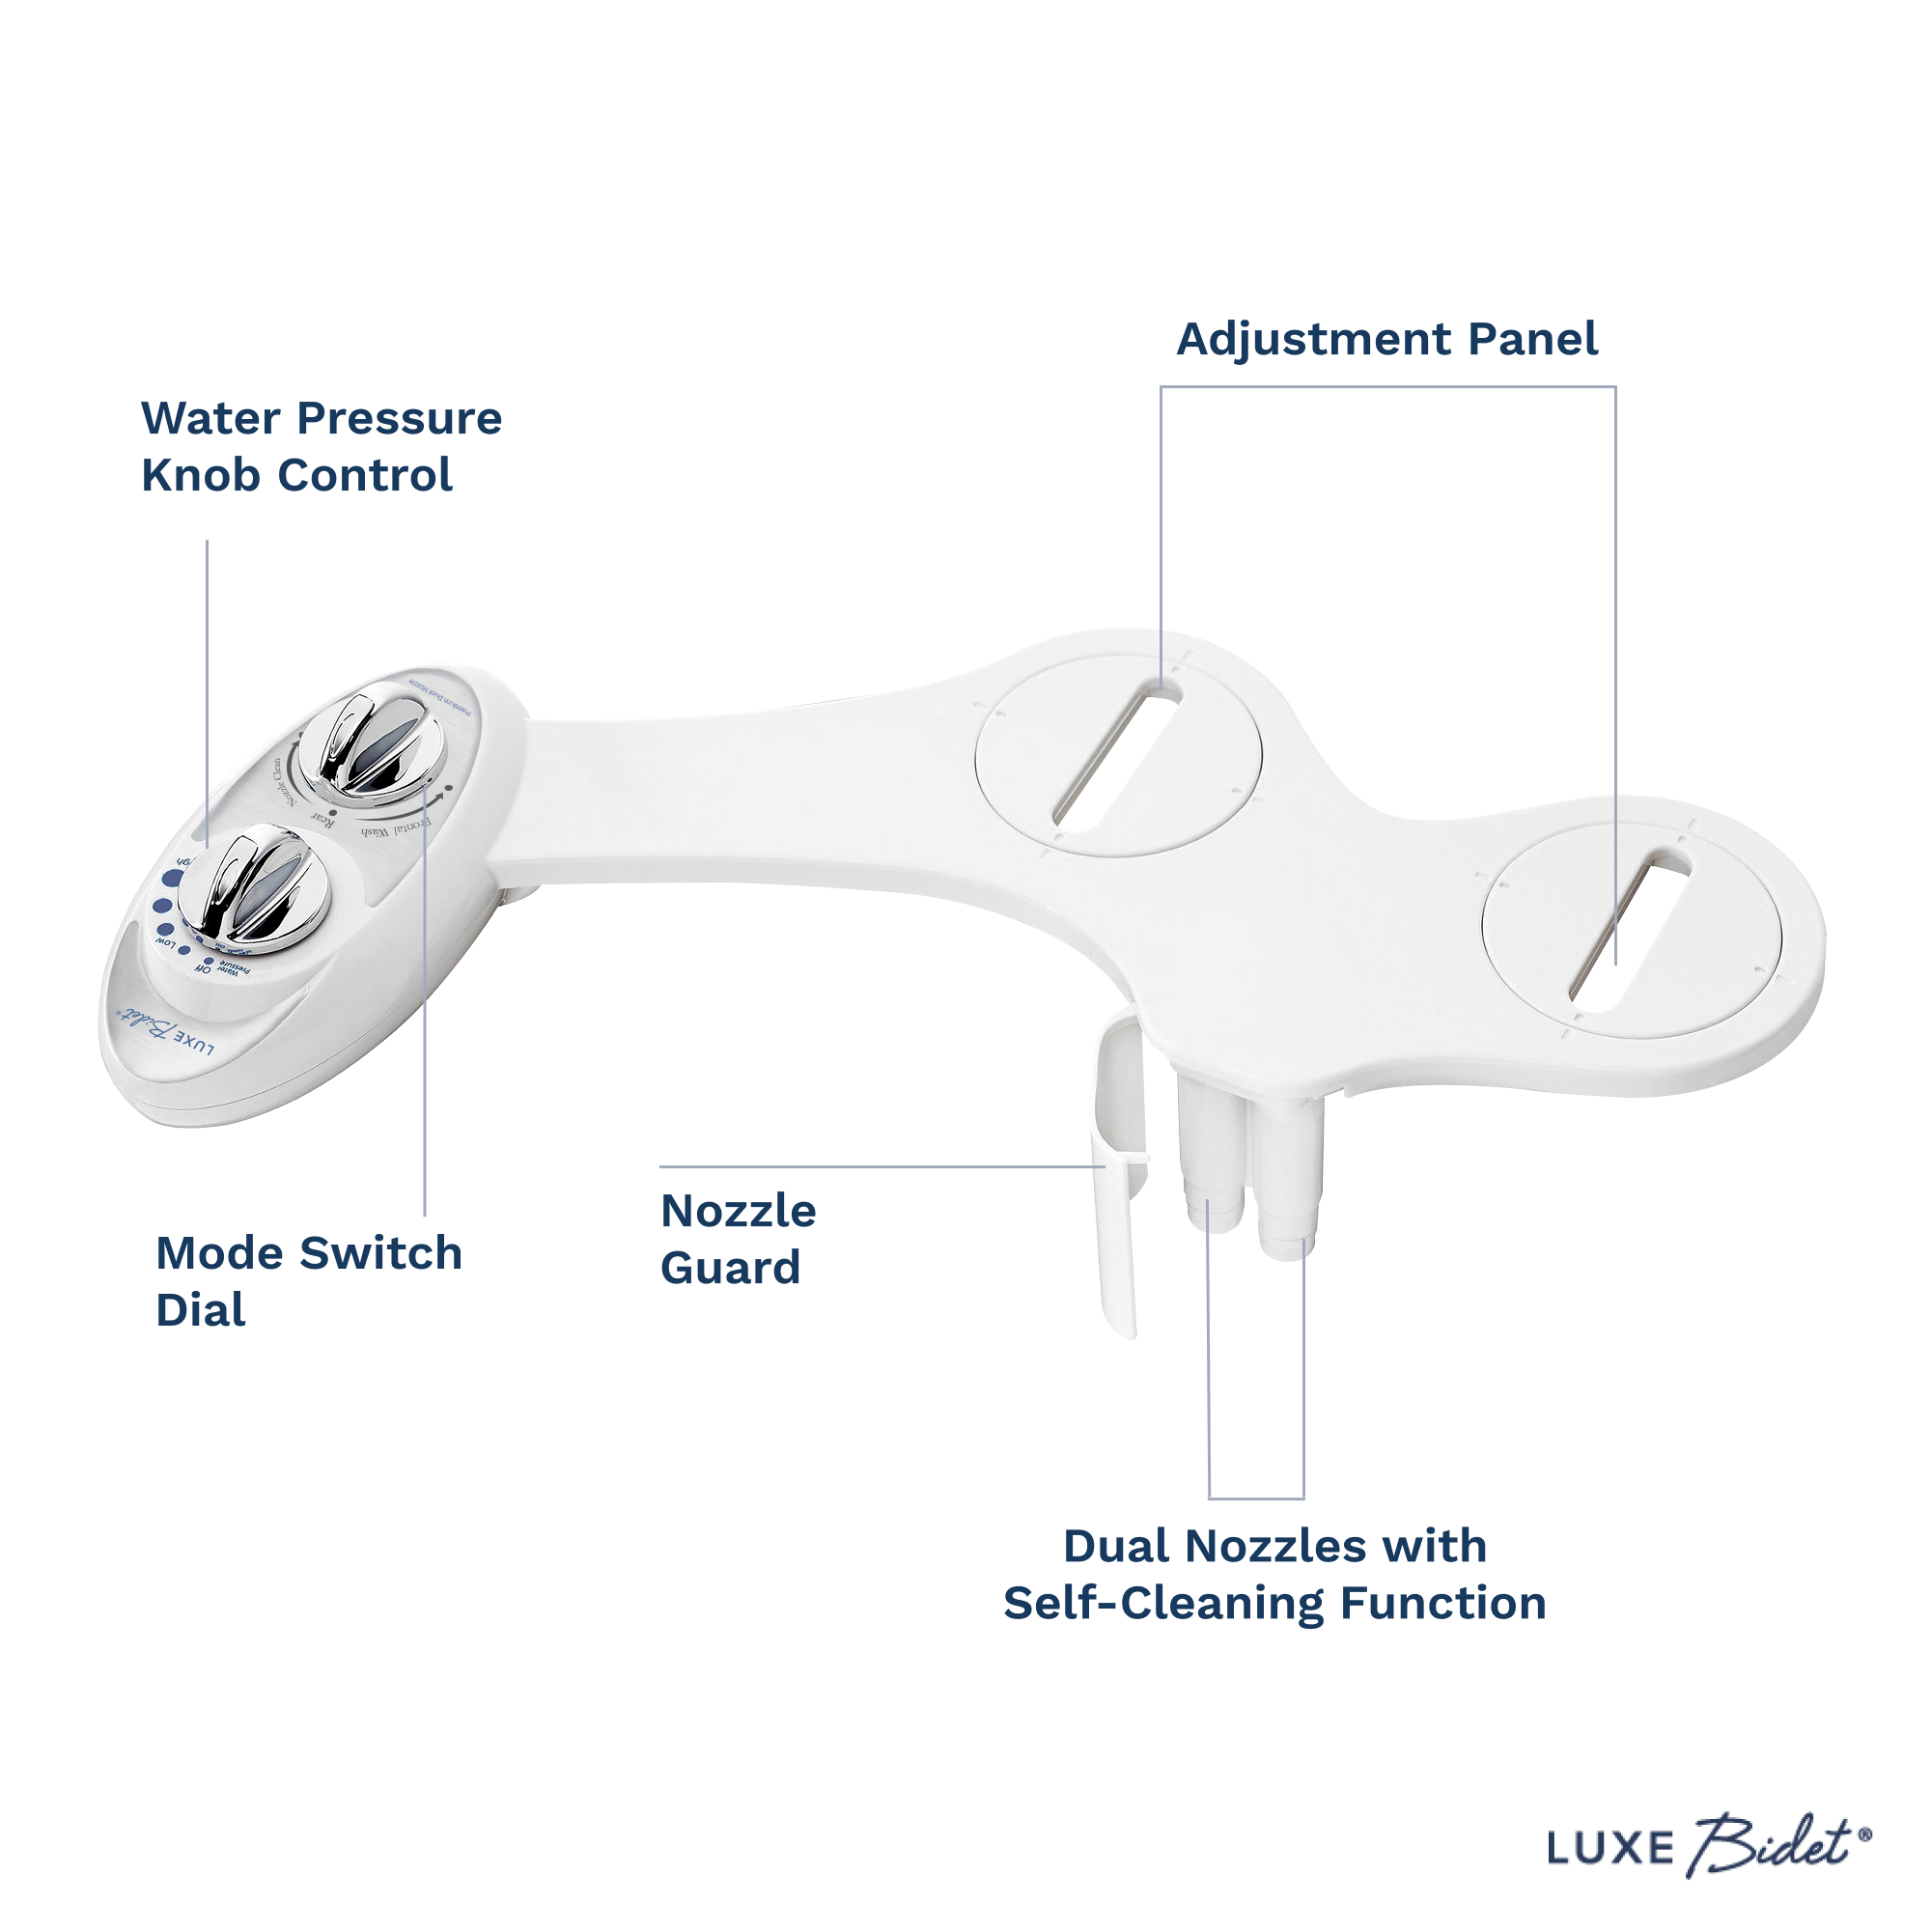 LUXE Bidet W85 Self-Cleaning, Dual Nozzle, Non-Electric Bidet Attachment for Toilet Seat, Adjustable Water Pressure, Rear and Feminine Wash (Pearl Gray) - image 2 of 5